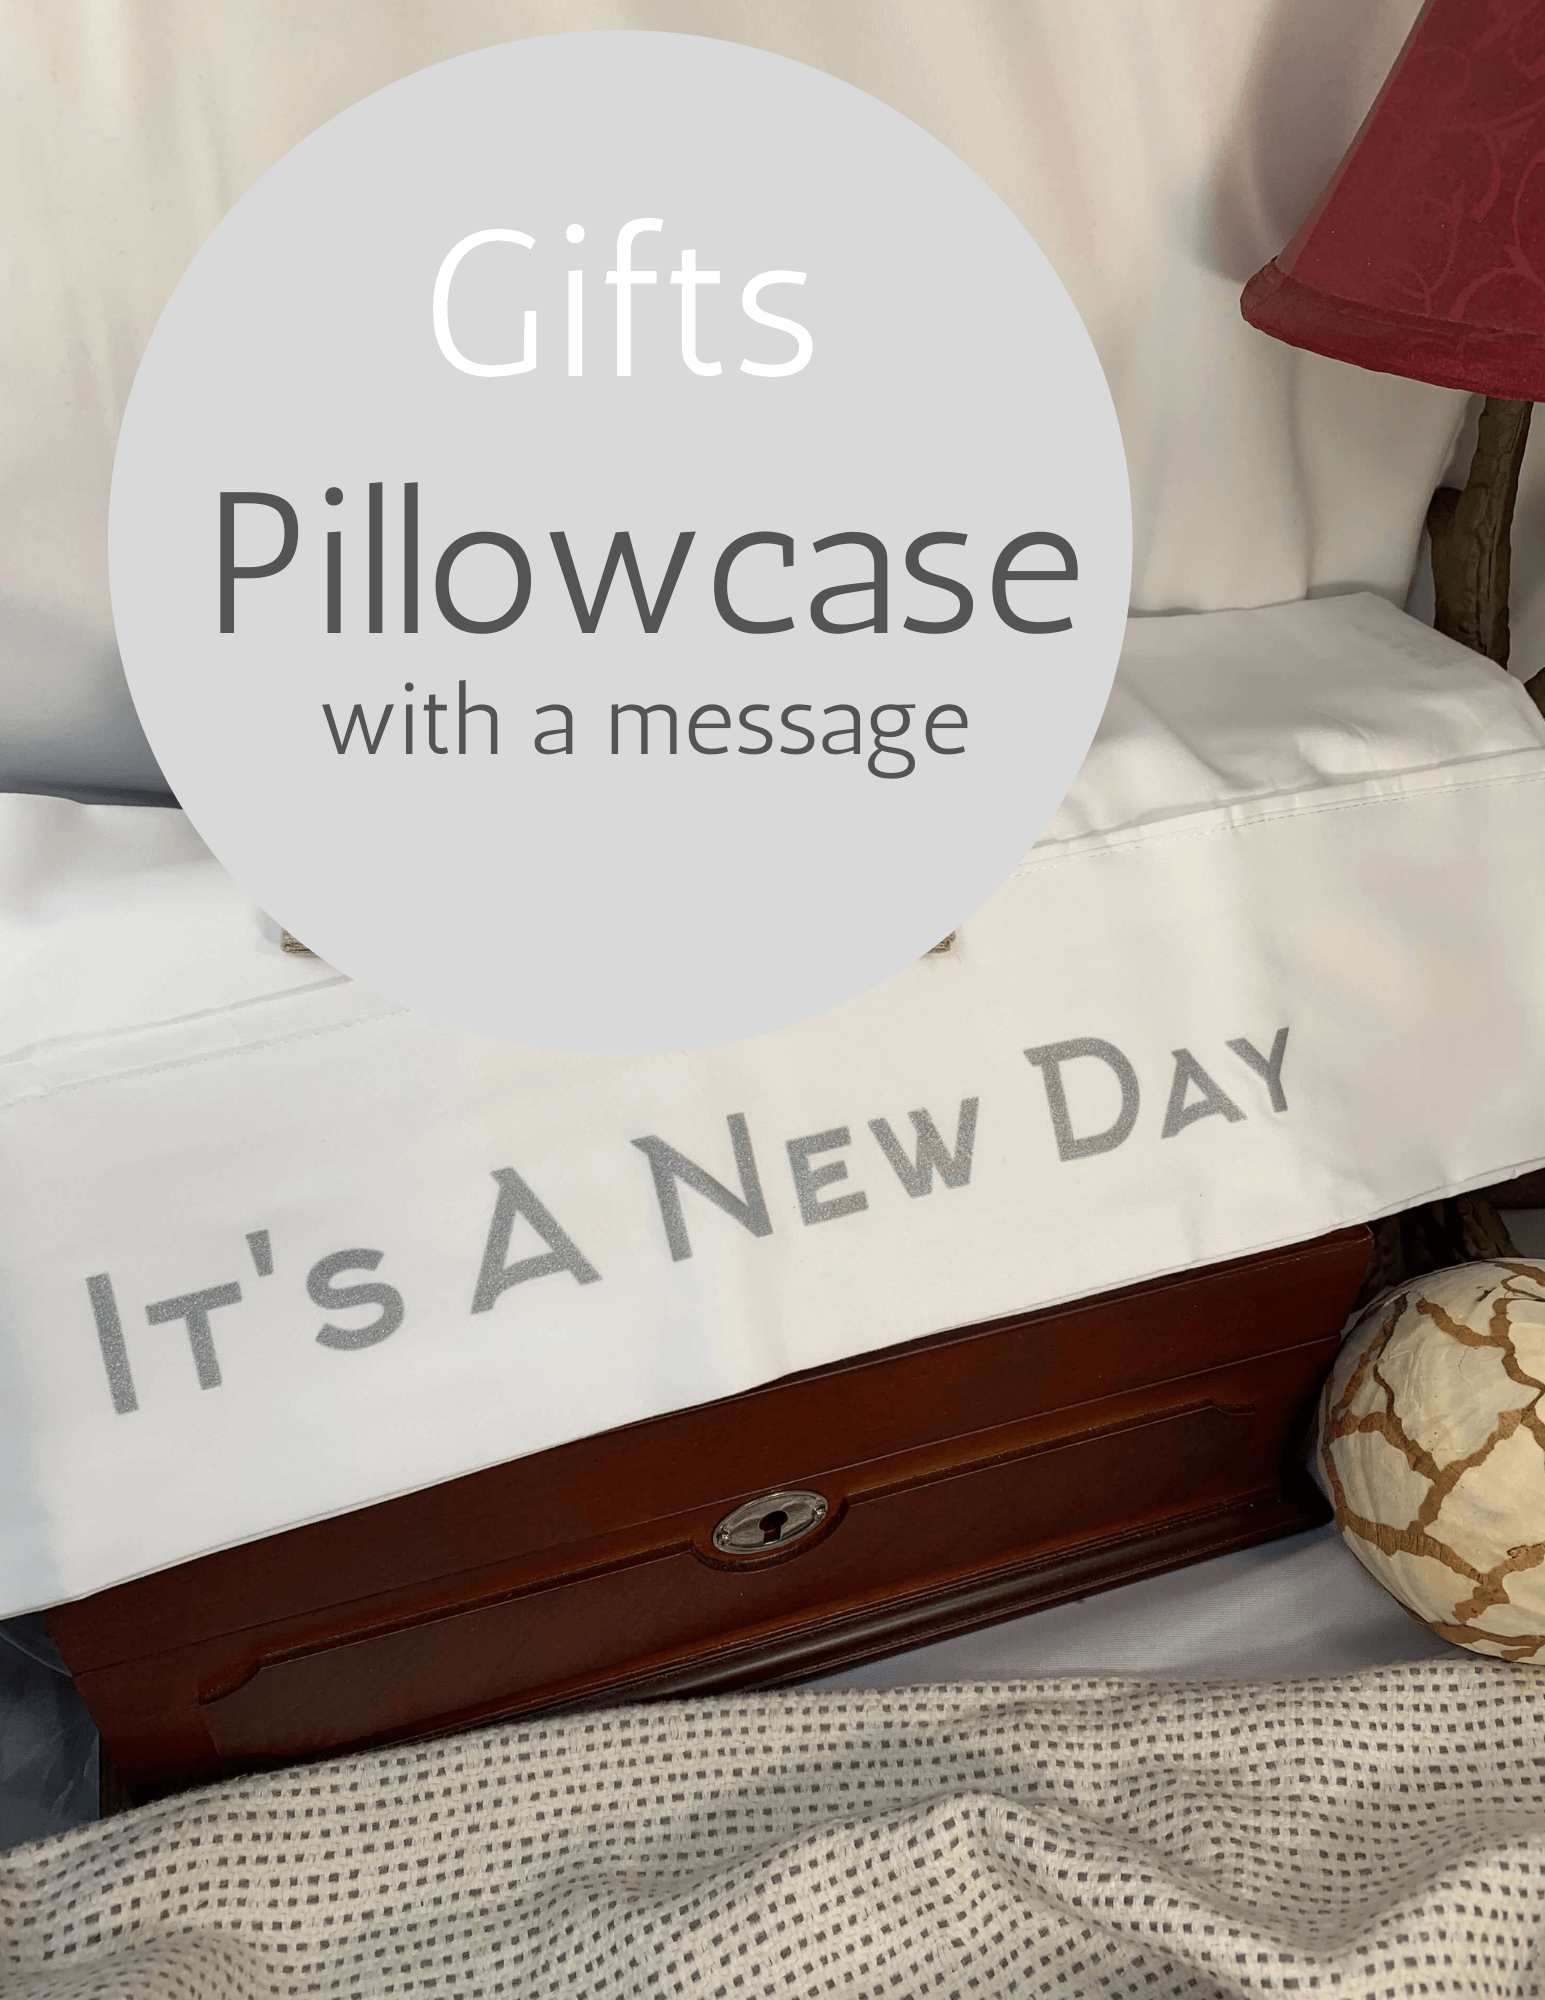 It's A New Day - Pillowcase with a Message